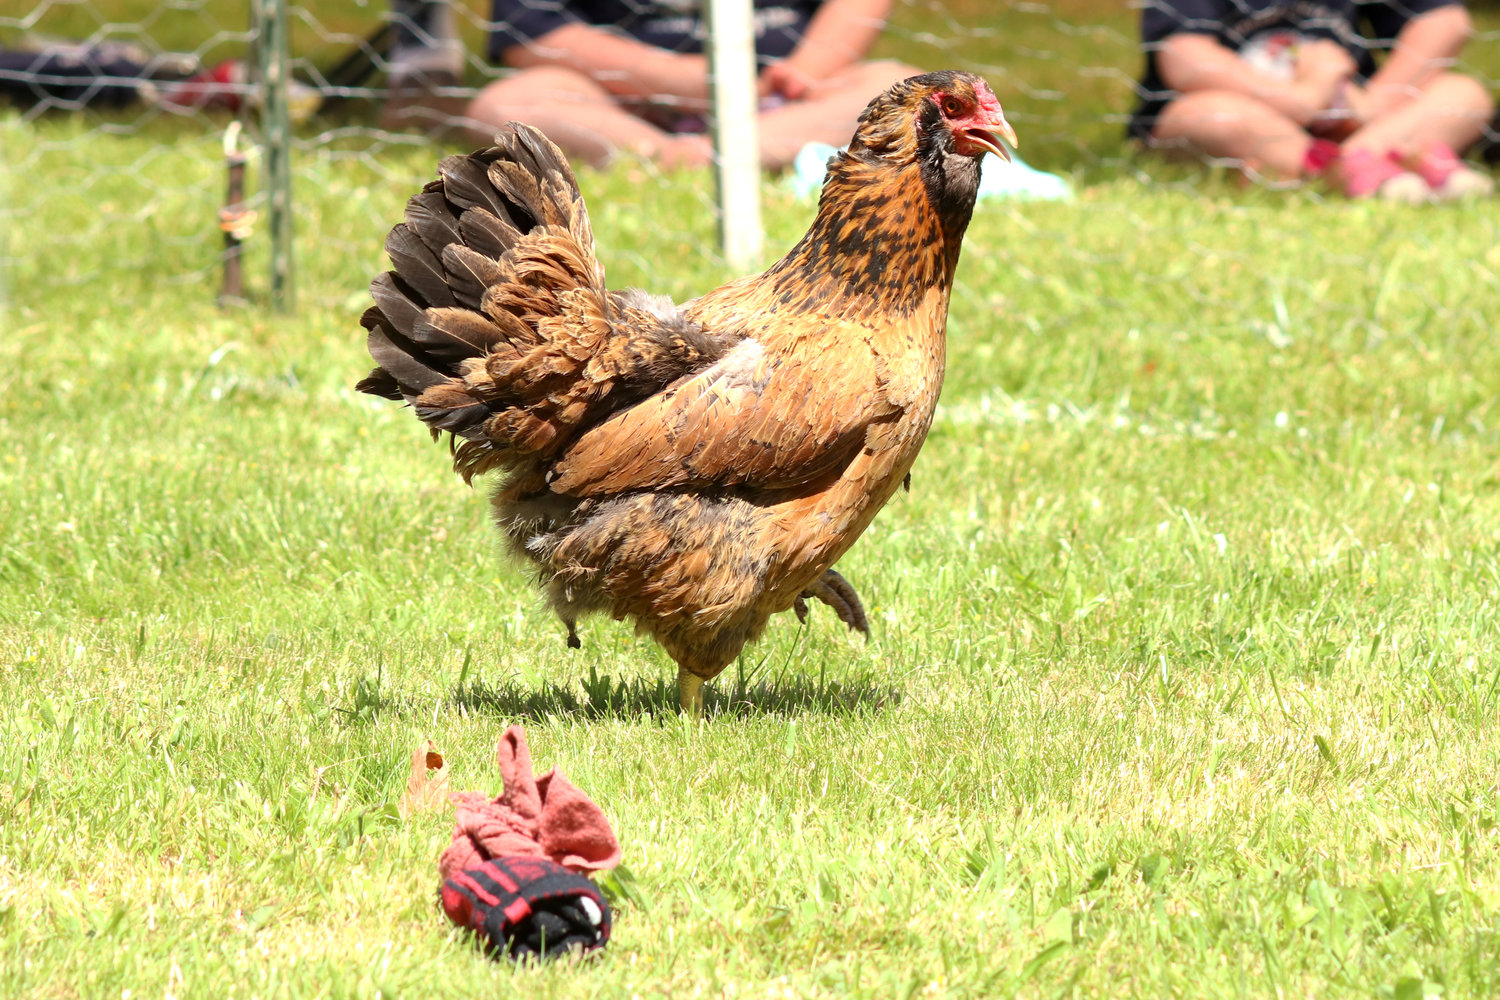 A chicken dodges a sock during the Independence Valley Community Hall’s 42nd Annual Chicken Races in Rochester on Sunday.